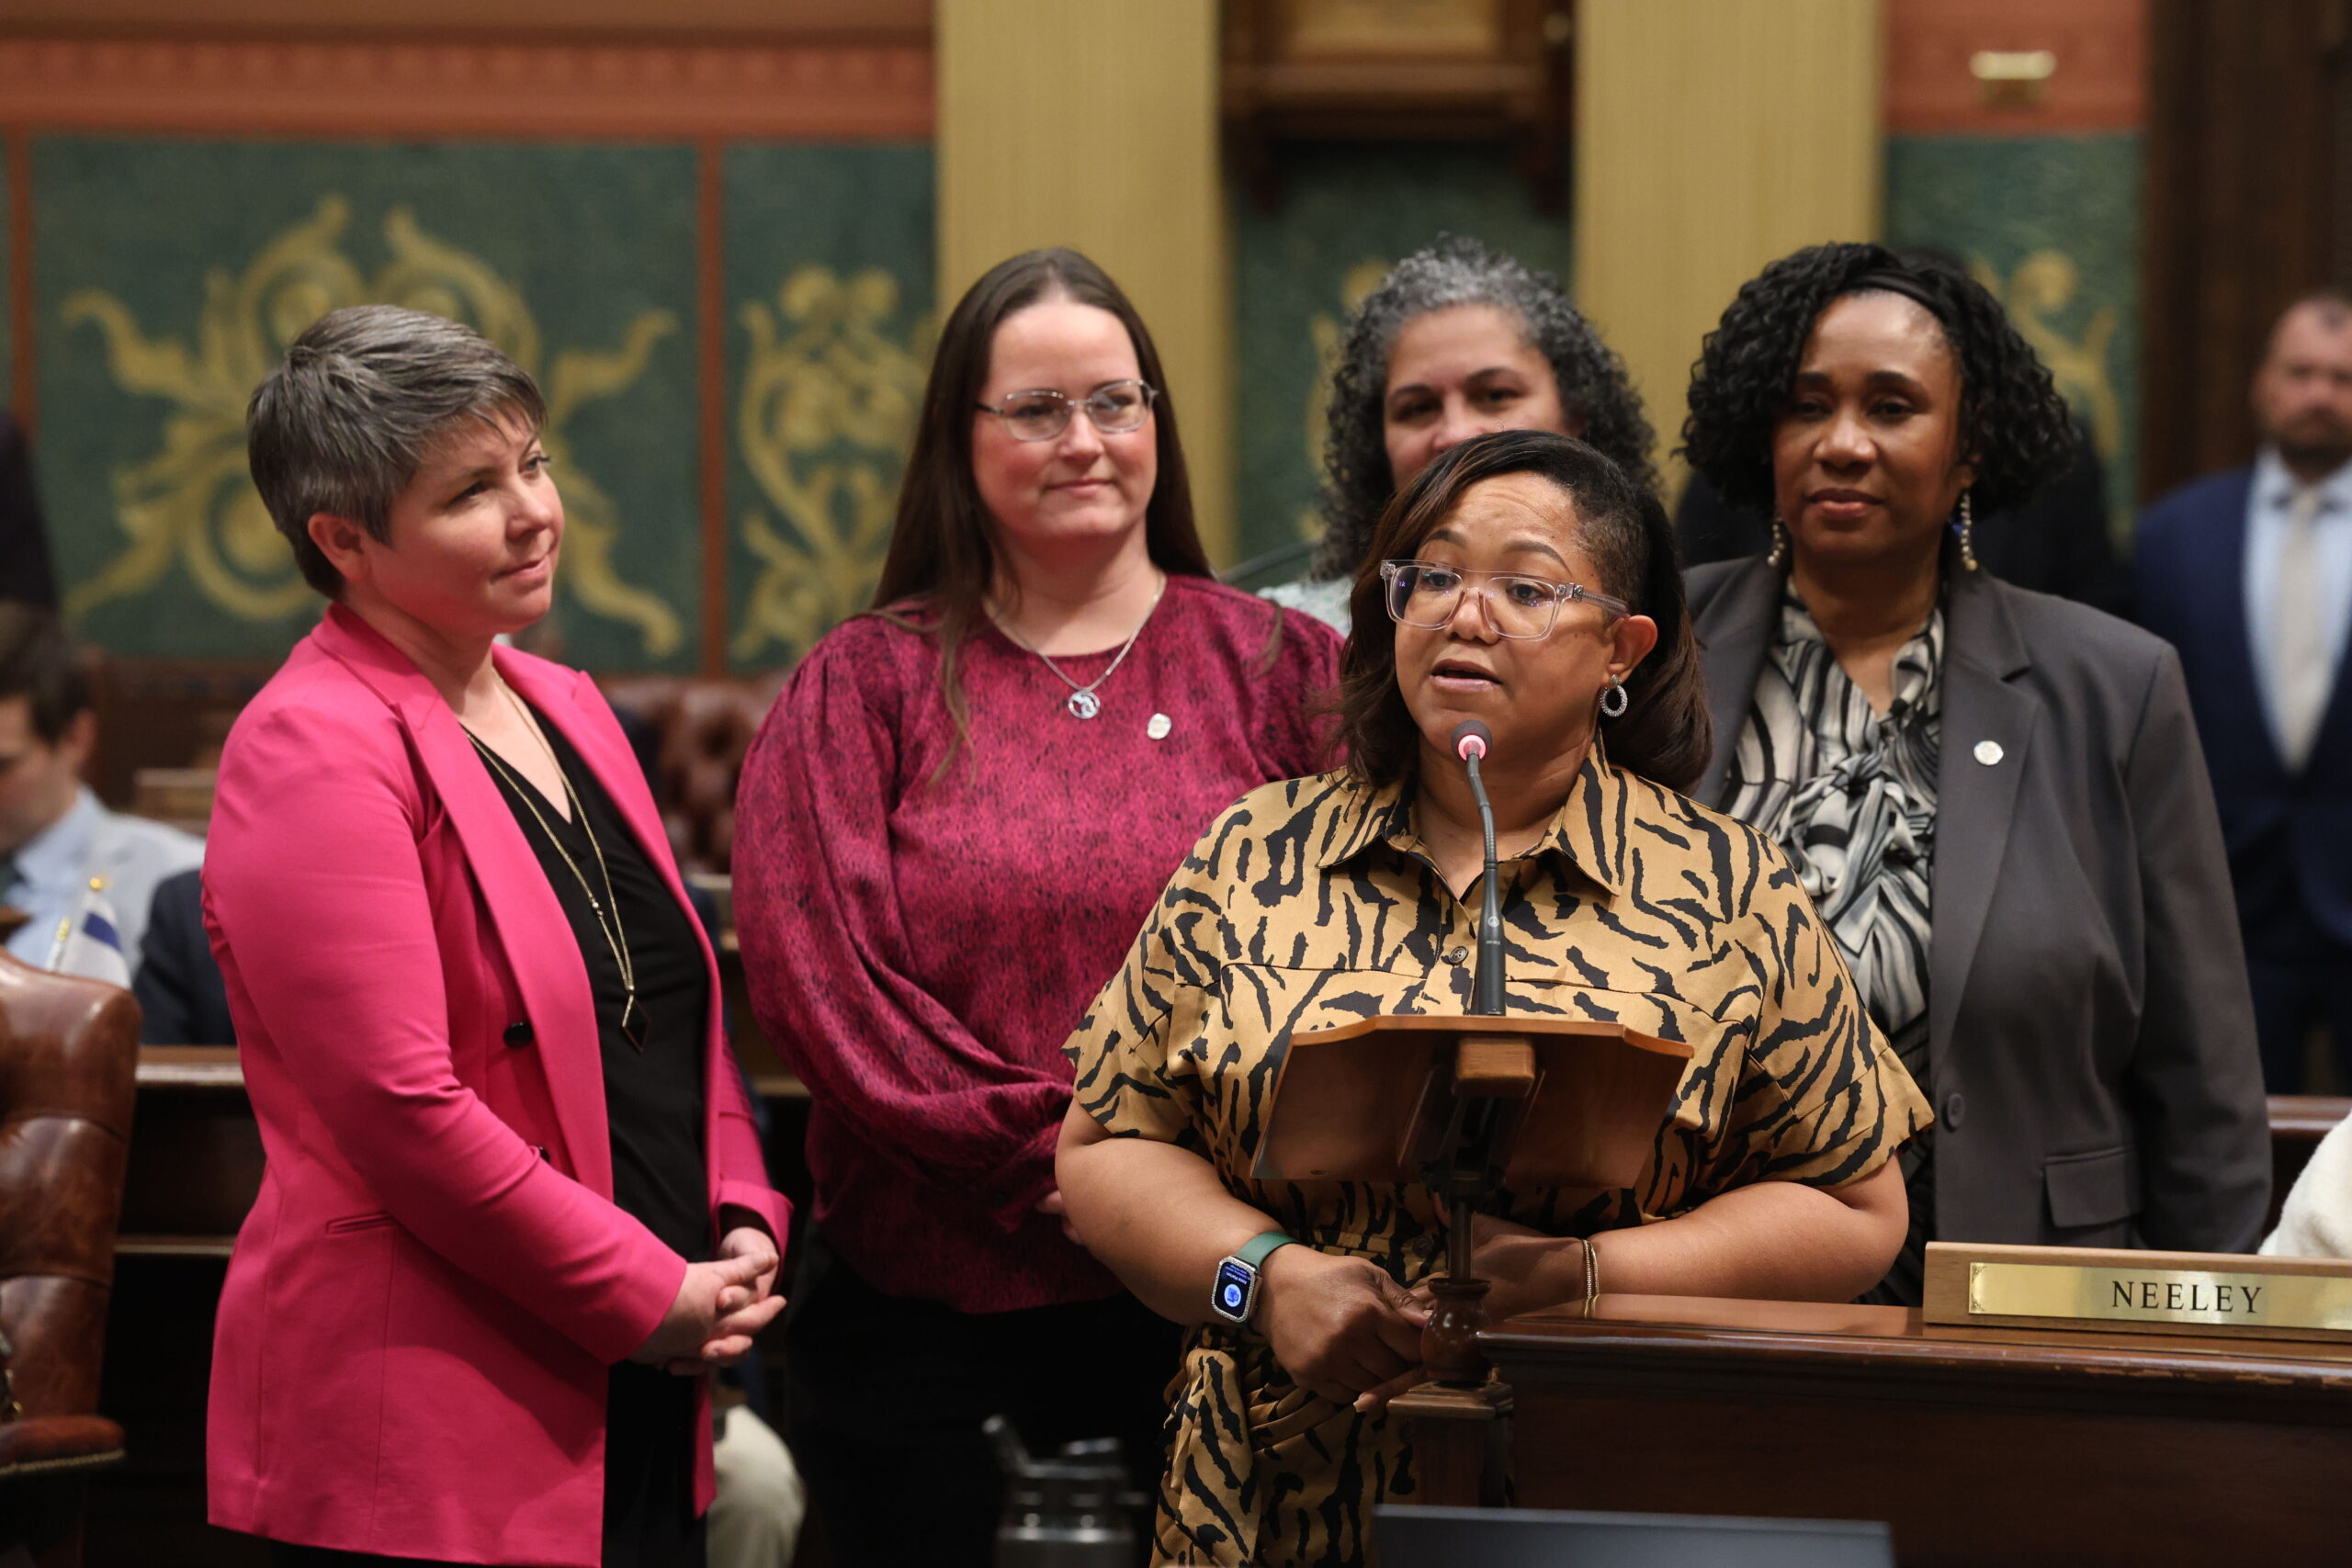 Rep. State Rep. Kimberly Edwards speaks on her resolution on the Michigan House floor, supported by state Reps. Betsy Coffia, Carrie Rheingans, Felicia Brabec and Stephanie A. Young.